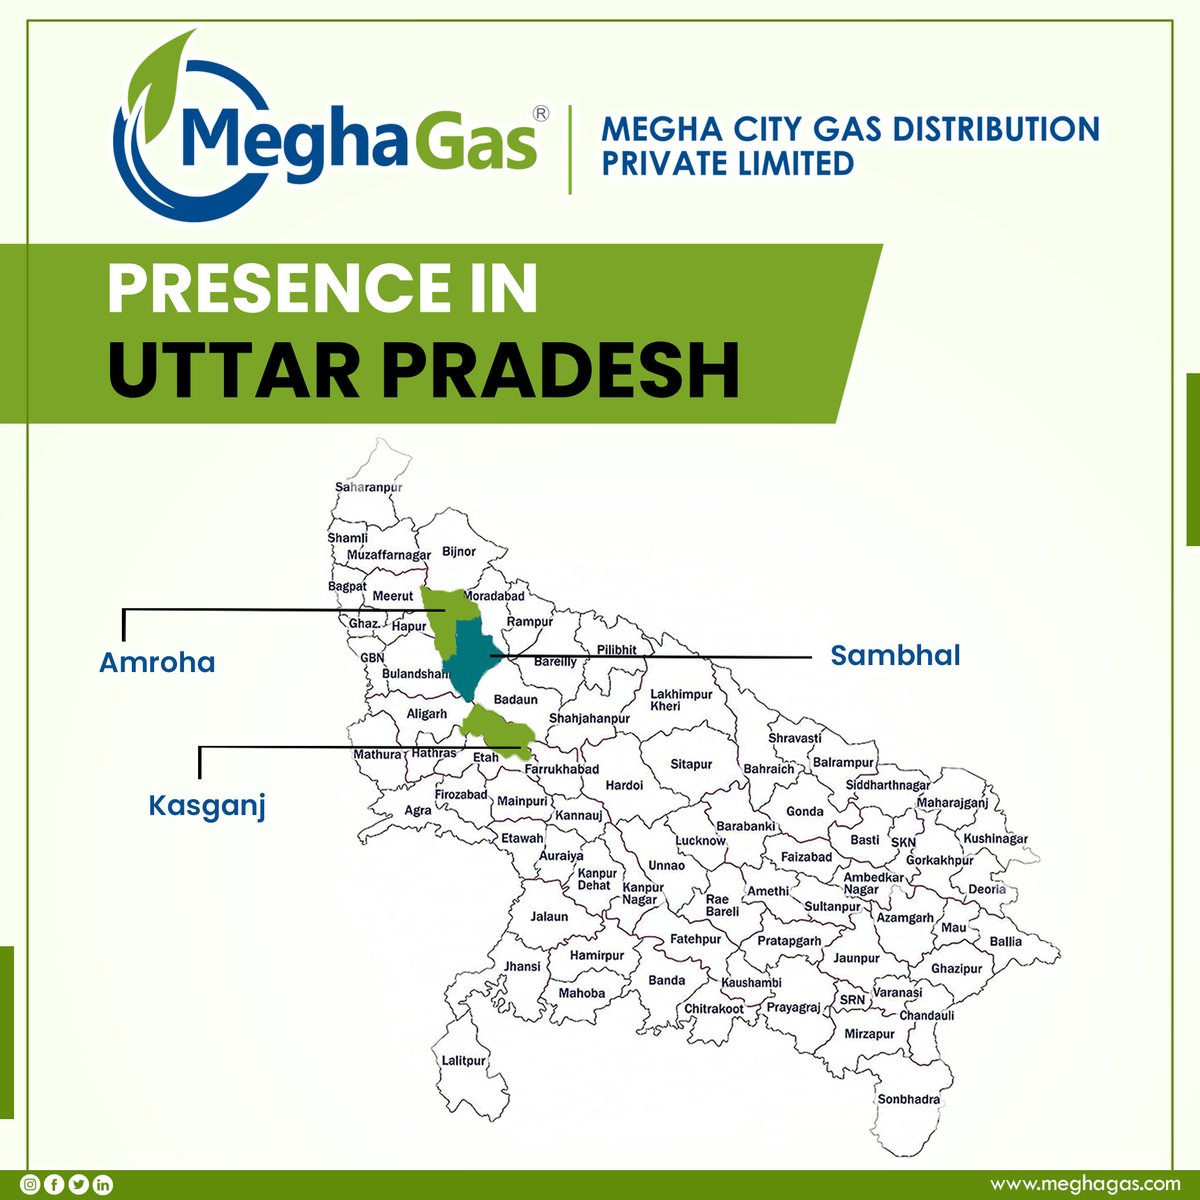 Megha Gas has its presence in three districts of #Amroha, #Sambhal & #Kasganj in #UttarPradesh serving the fuel needs of people there.

#MeghaGas #CNG #CGD #CleanEnergy #GasVehicles #FuelOfTheFuture #EcoFriendly #SaveEnvironment #GreenFuel #GreenerEarth #Sustainable #MEIL #MCGDPL